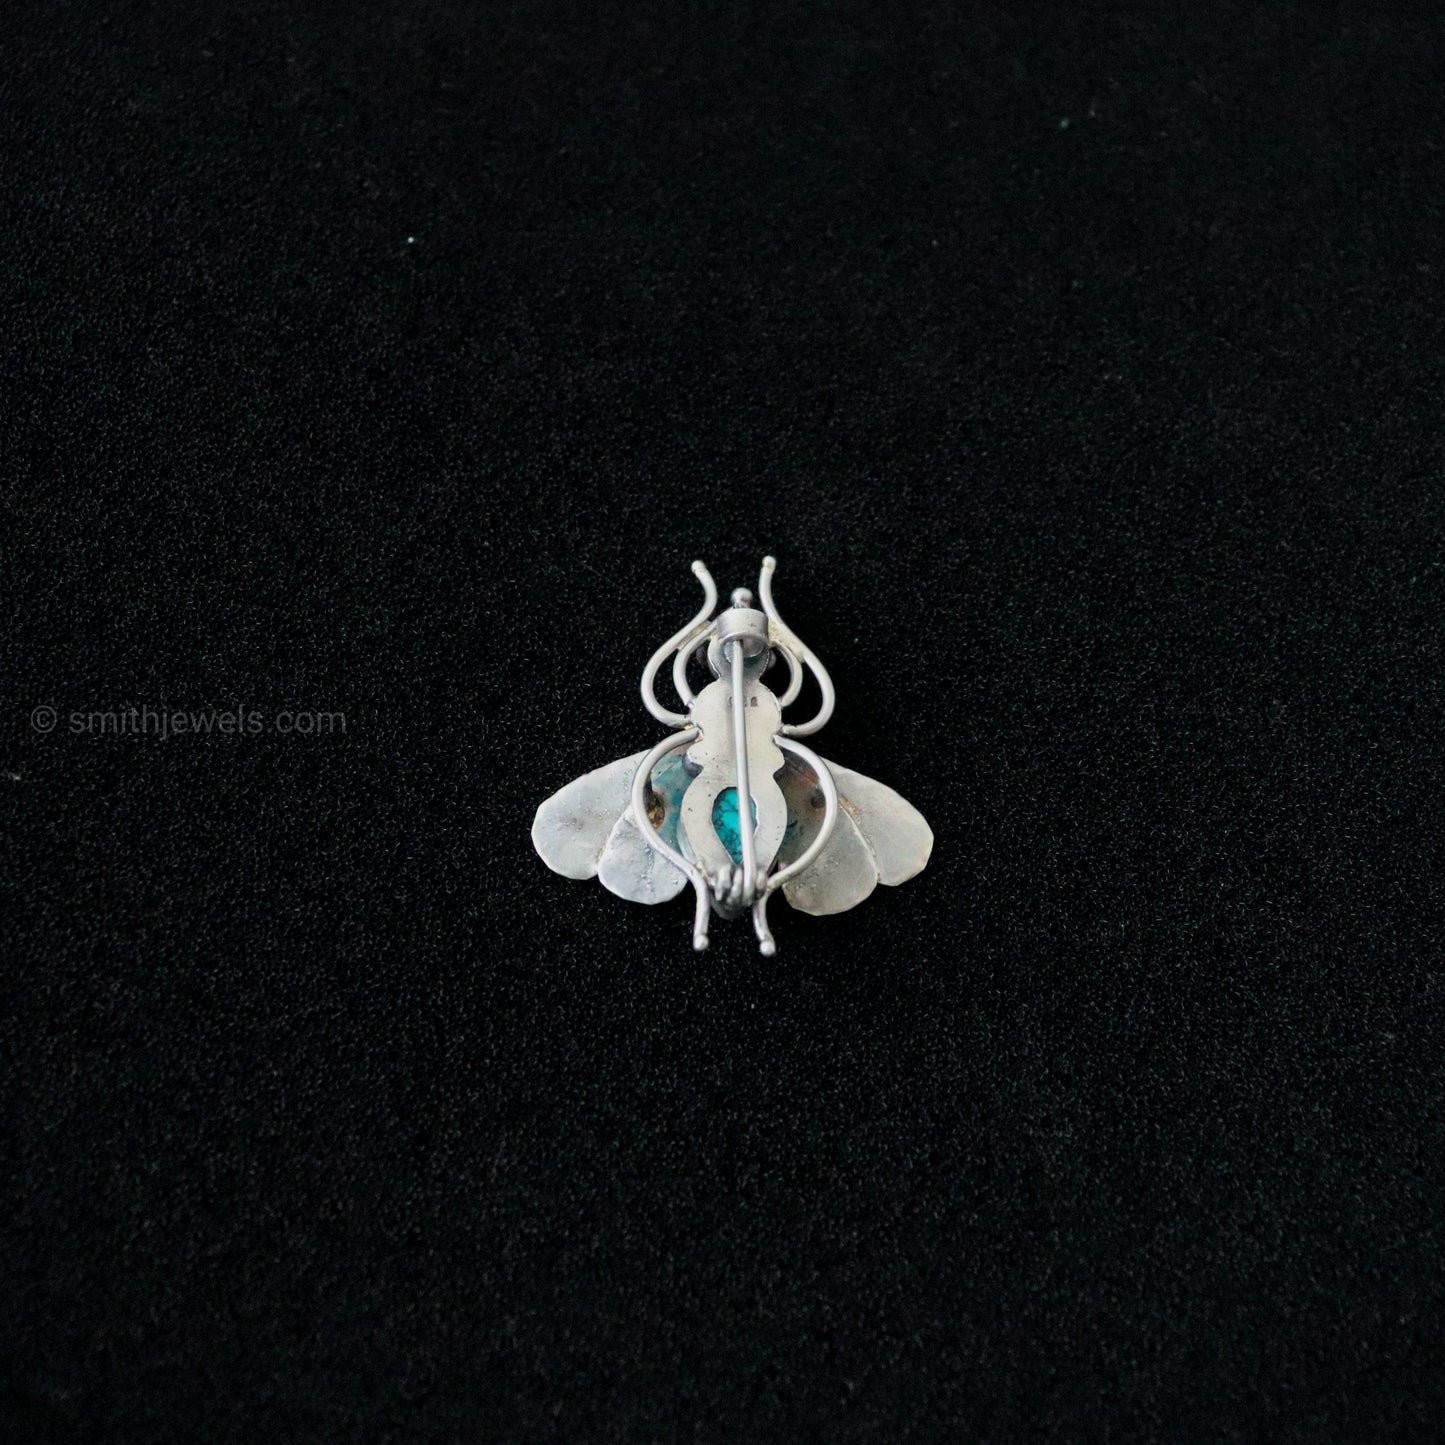 Housefly Brooch (Turquoise) - Smith Jewels